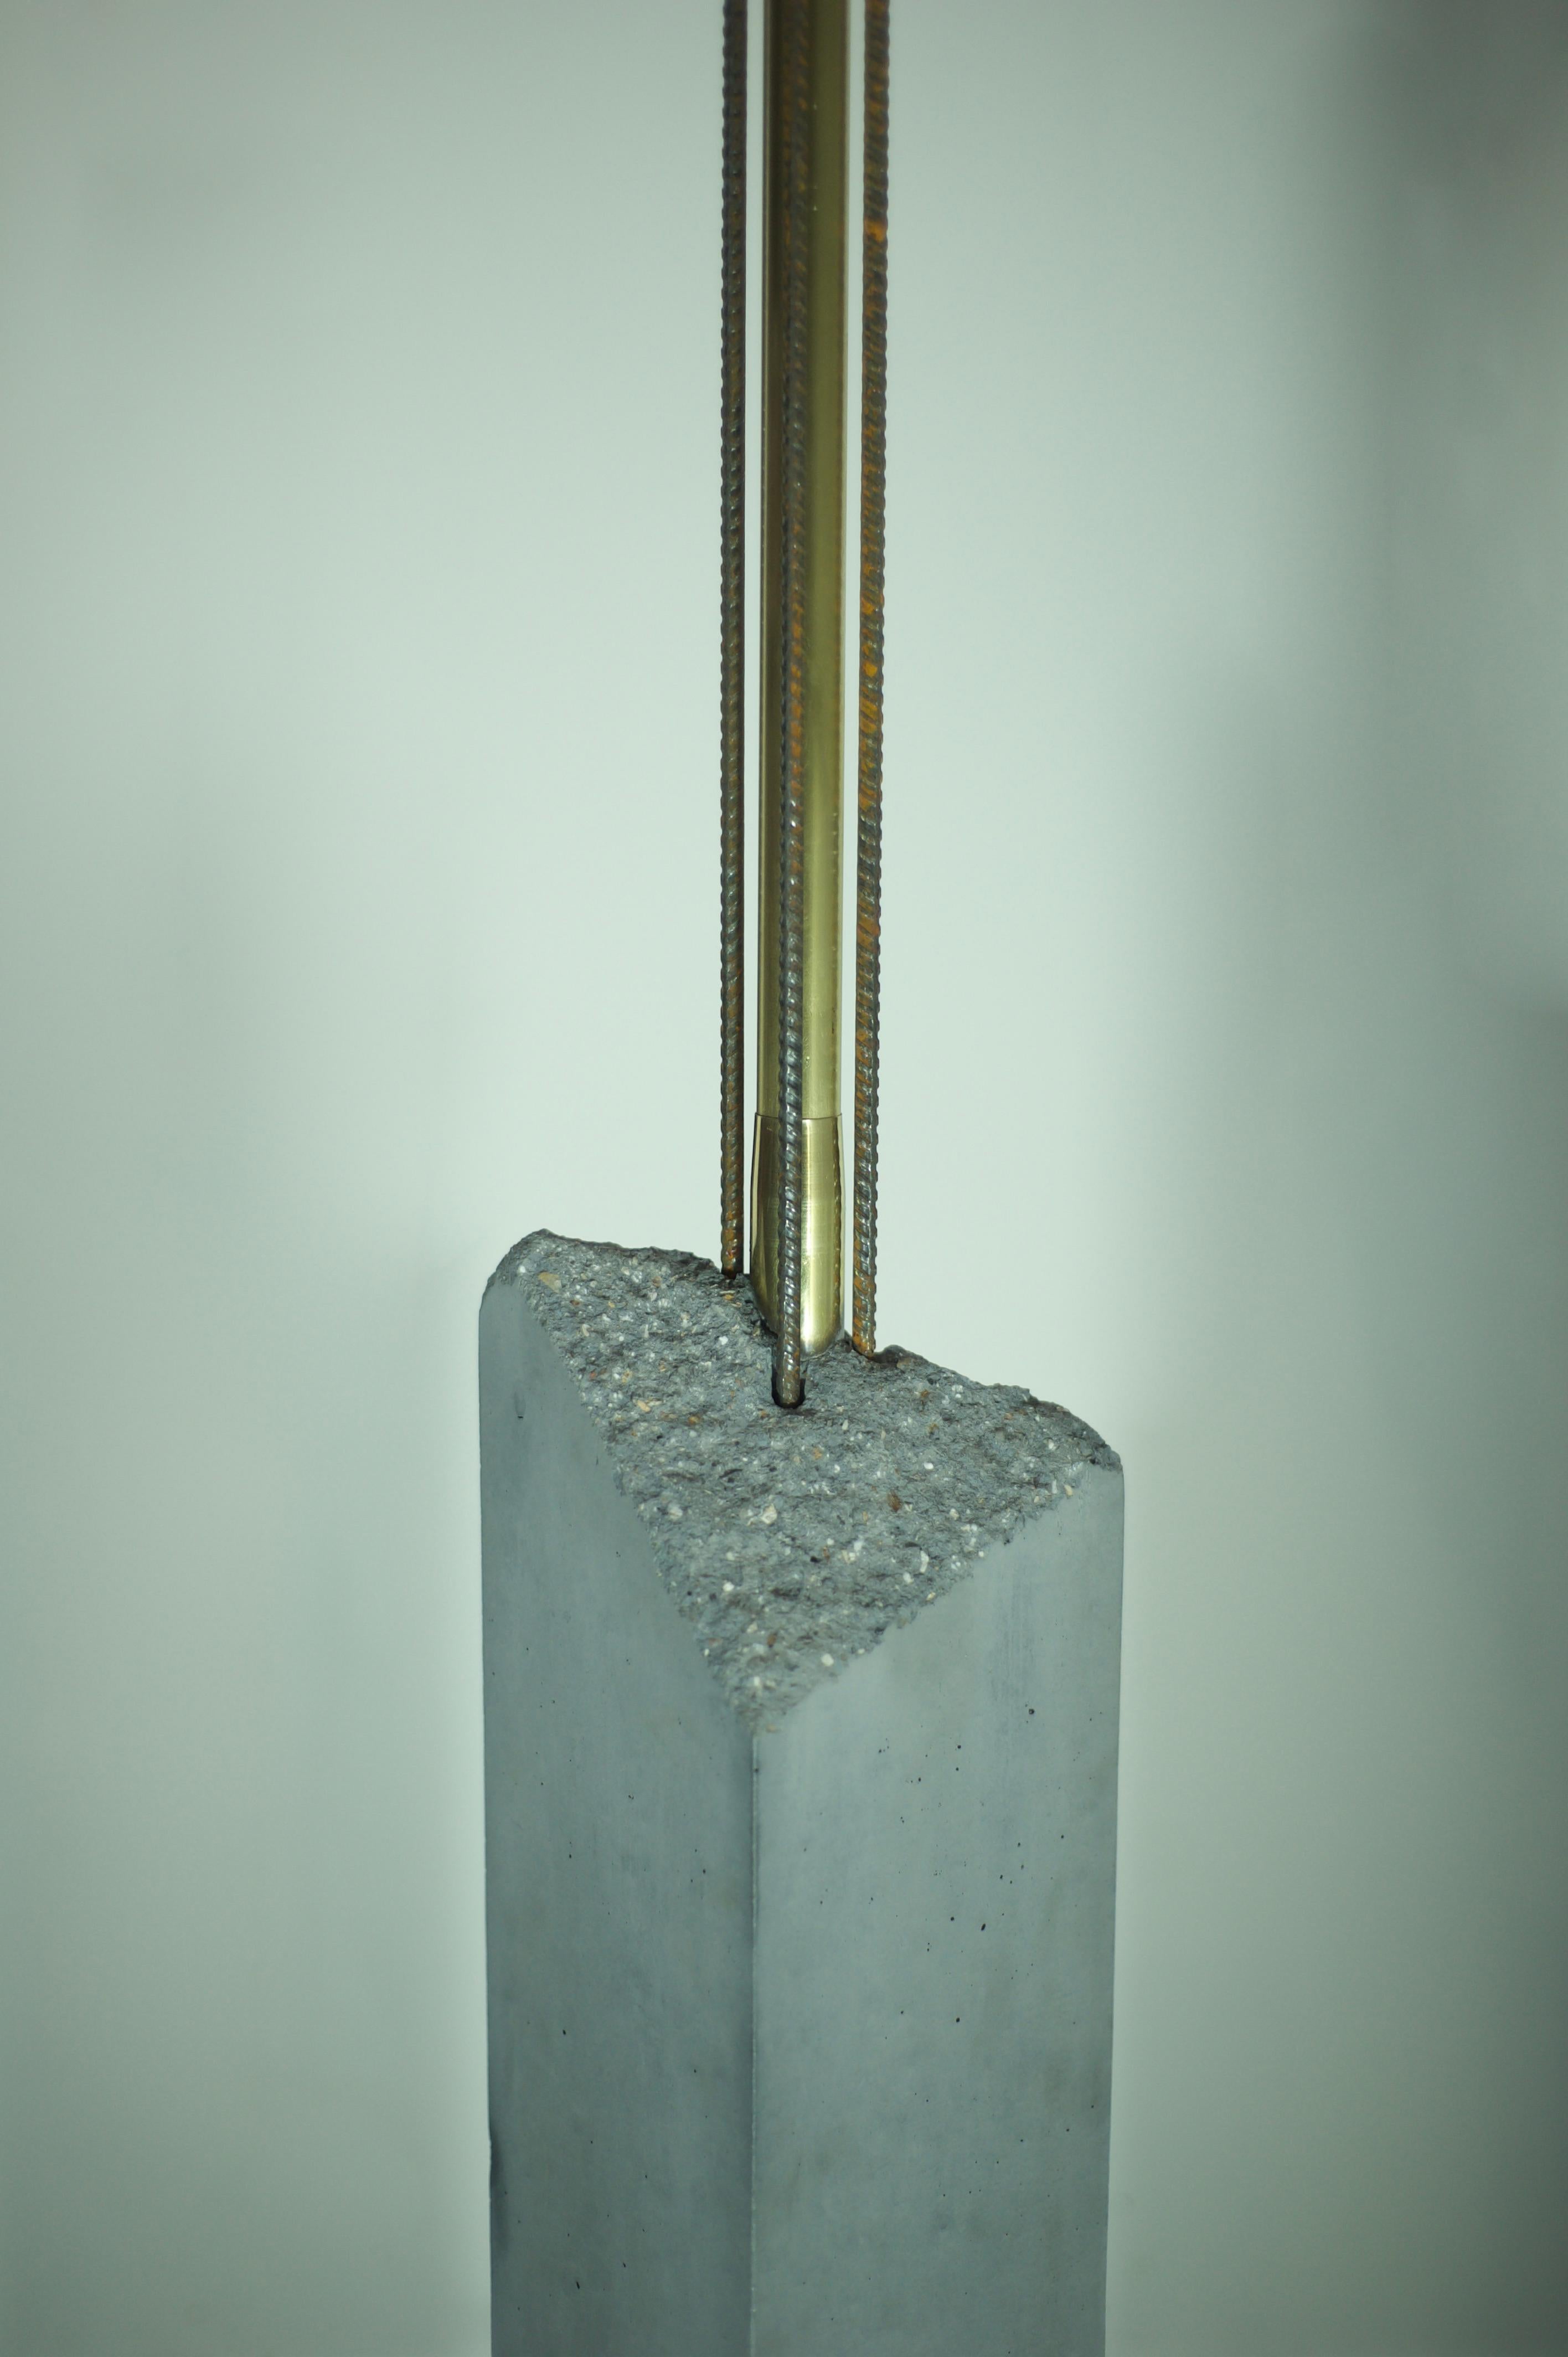 Luna is a floor lamp made of concrete, brass and raw steel rods created and handcrafted by Luca Biancheri, Compagnon Des Devoirs Du Tour De France *, in his Parisian workshop.

Luna is a limited series composed of nine pieces, each numbered and